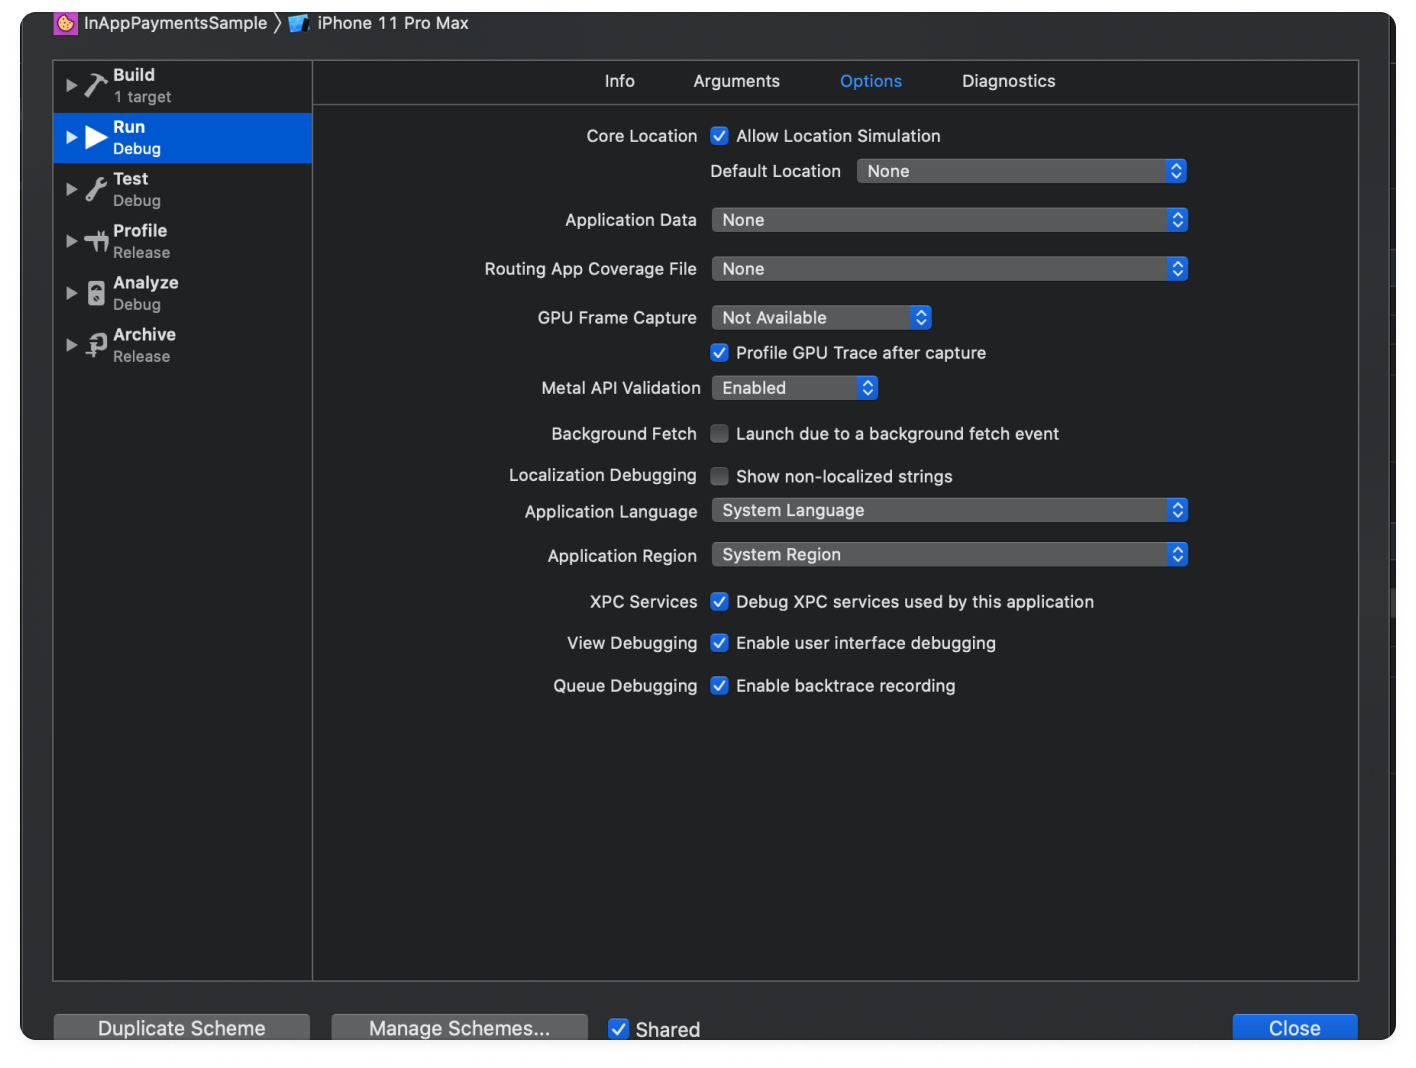 A graphic showing your Xcode project schema, with Application Language set to System Language.